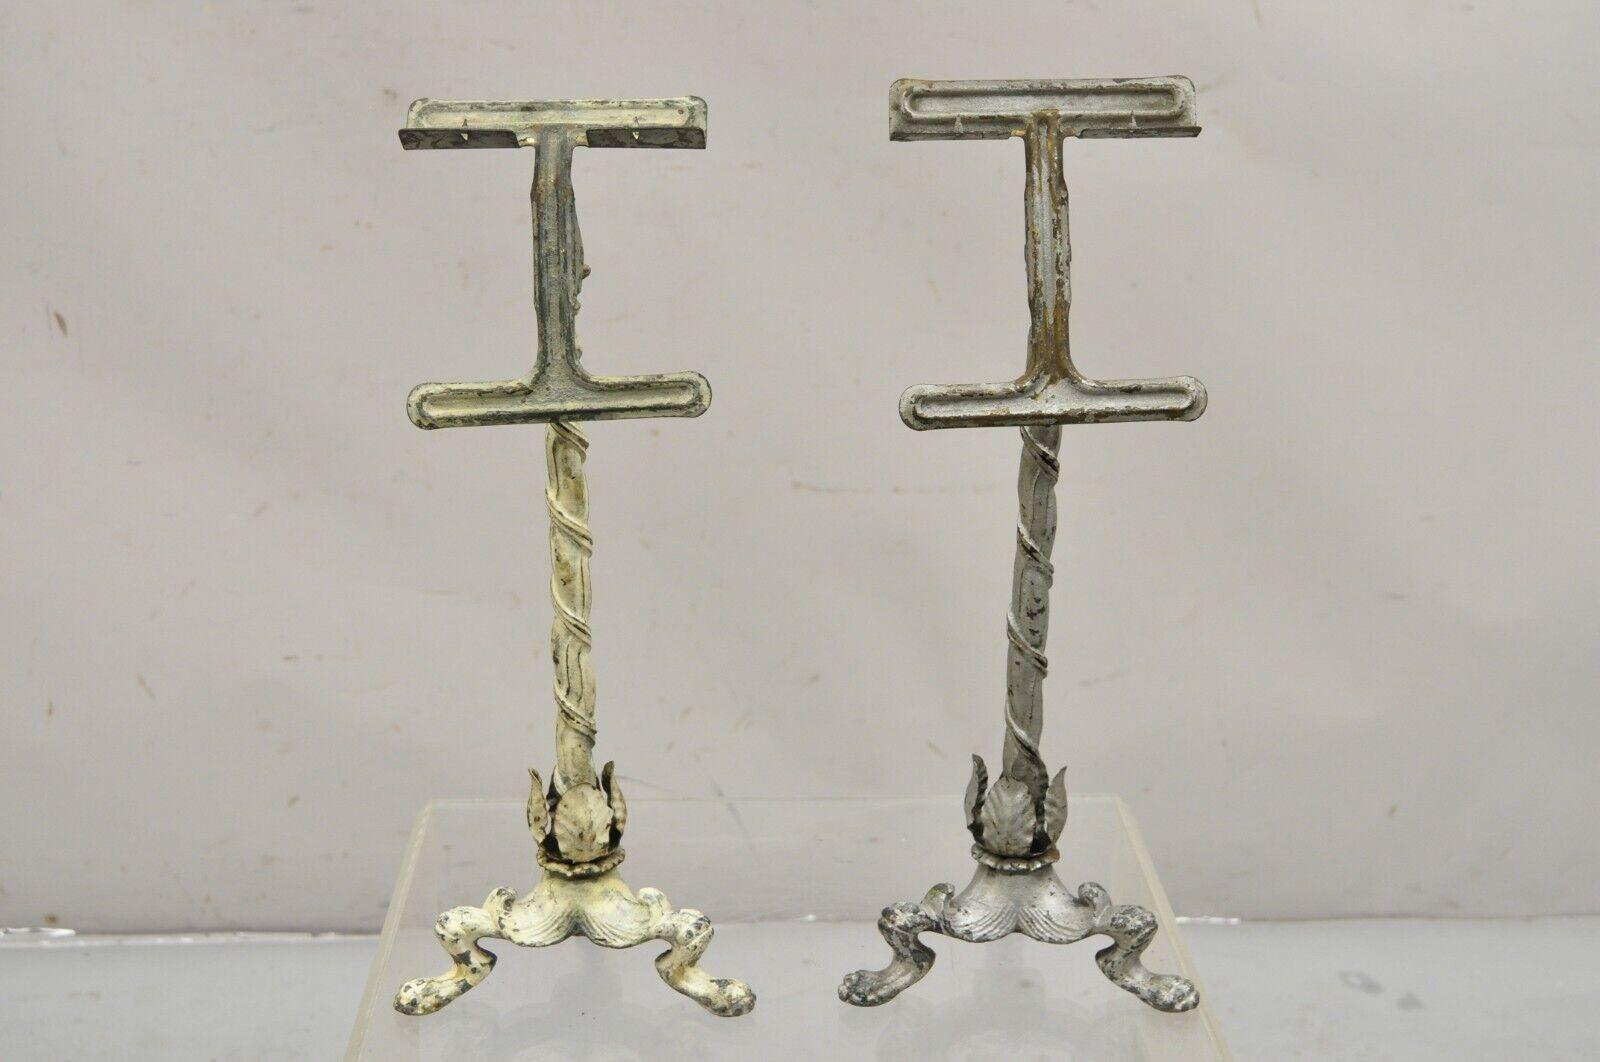 Antique Victorian Cast Iron Tripod Paw Feet General Store Retail Display - Pair For Sale 6